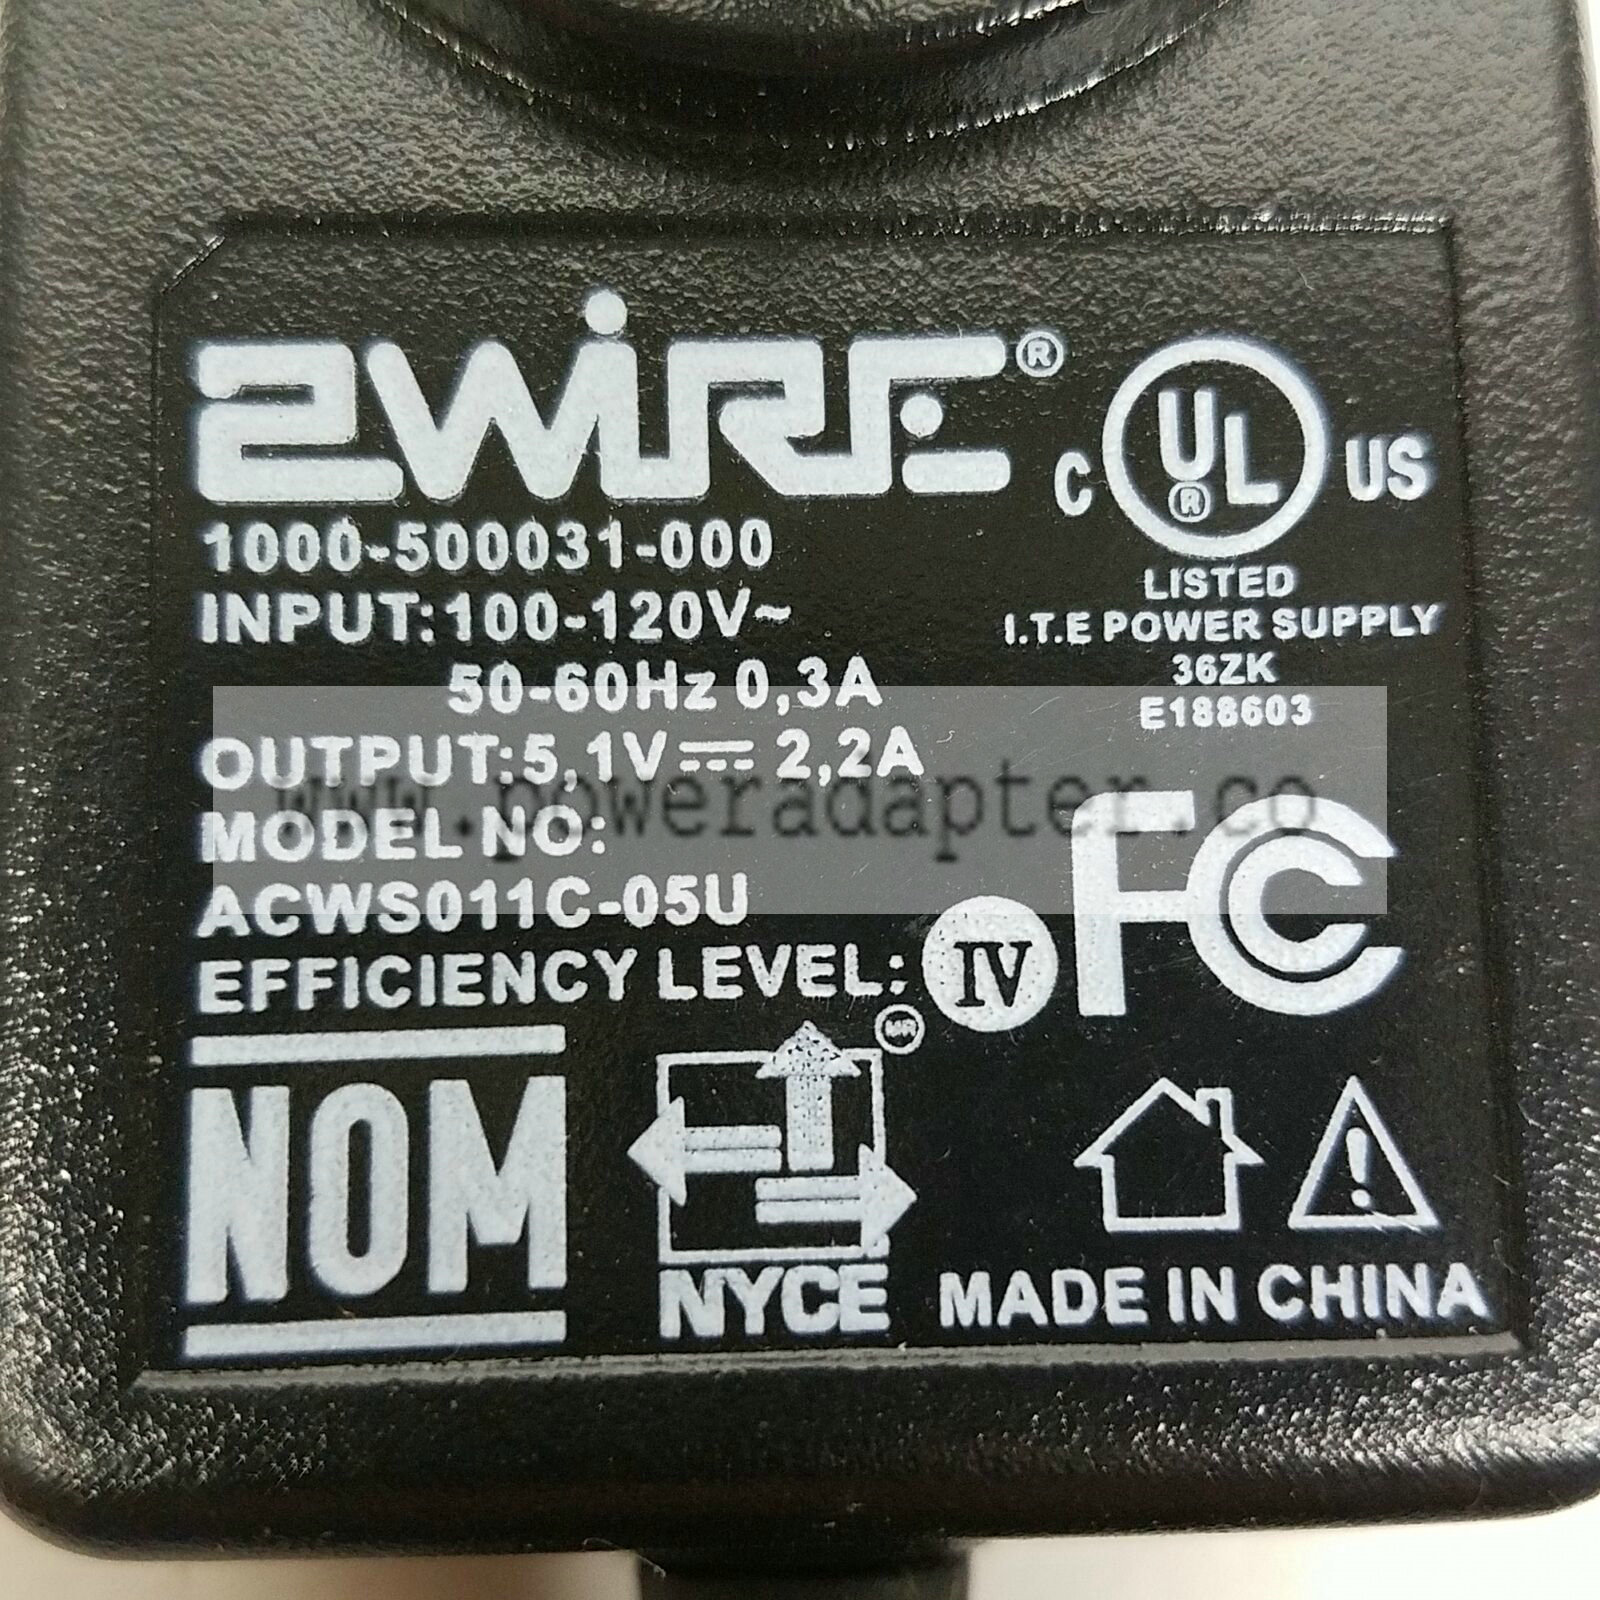 2Wire ACWS011C-05U 1000-500031-000 AC Power Supply Adapter 5.1V 2.2A Brand: 2Wire MPN: 1000-500031-000 Model: ACWS - Click Image to Close